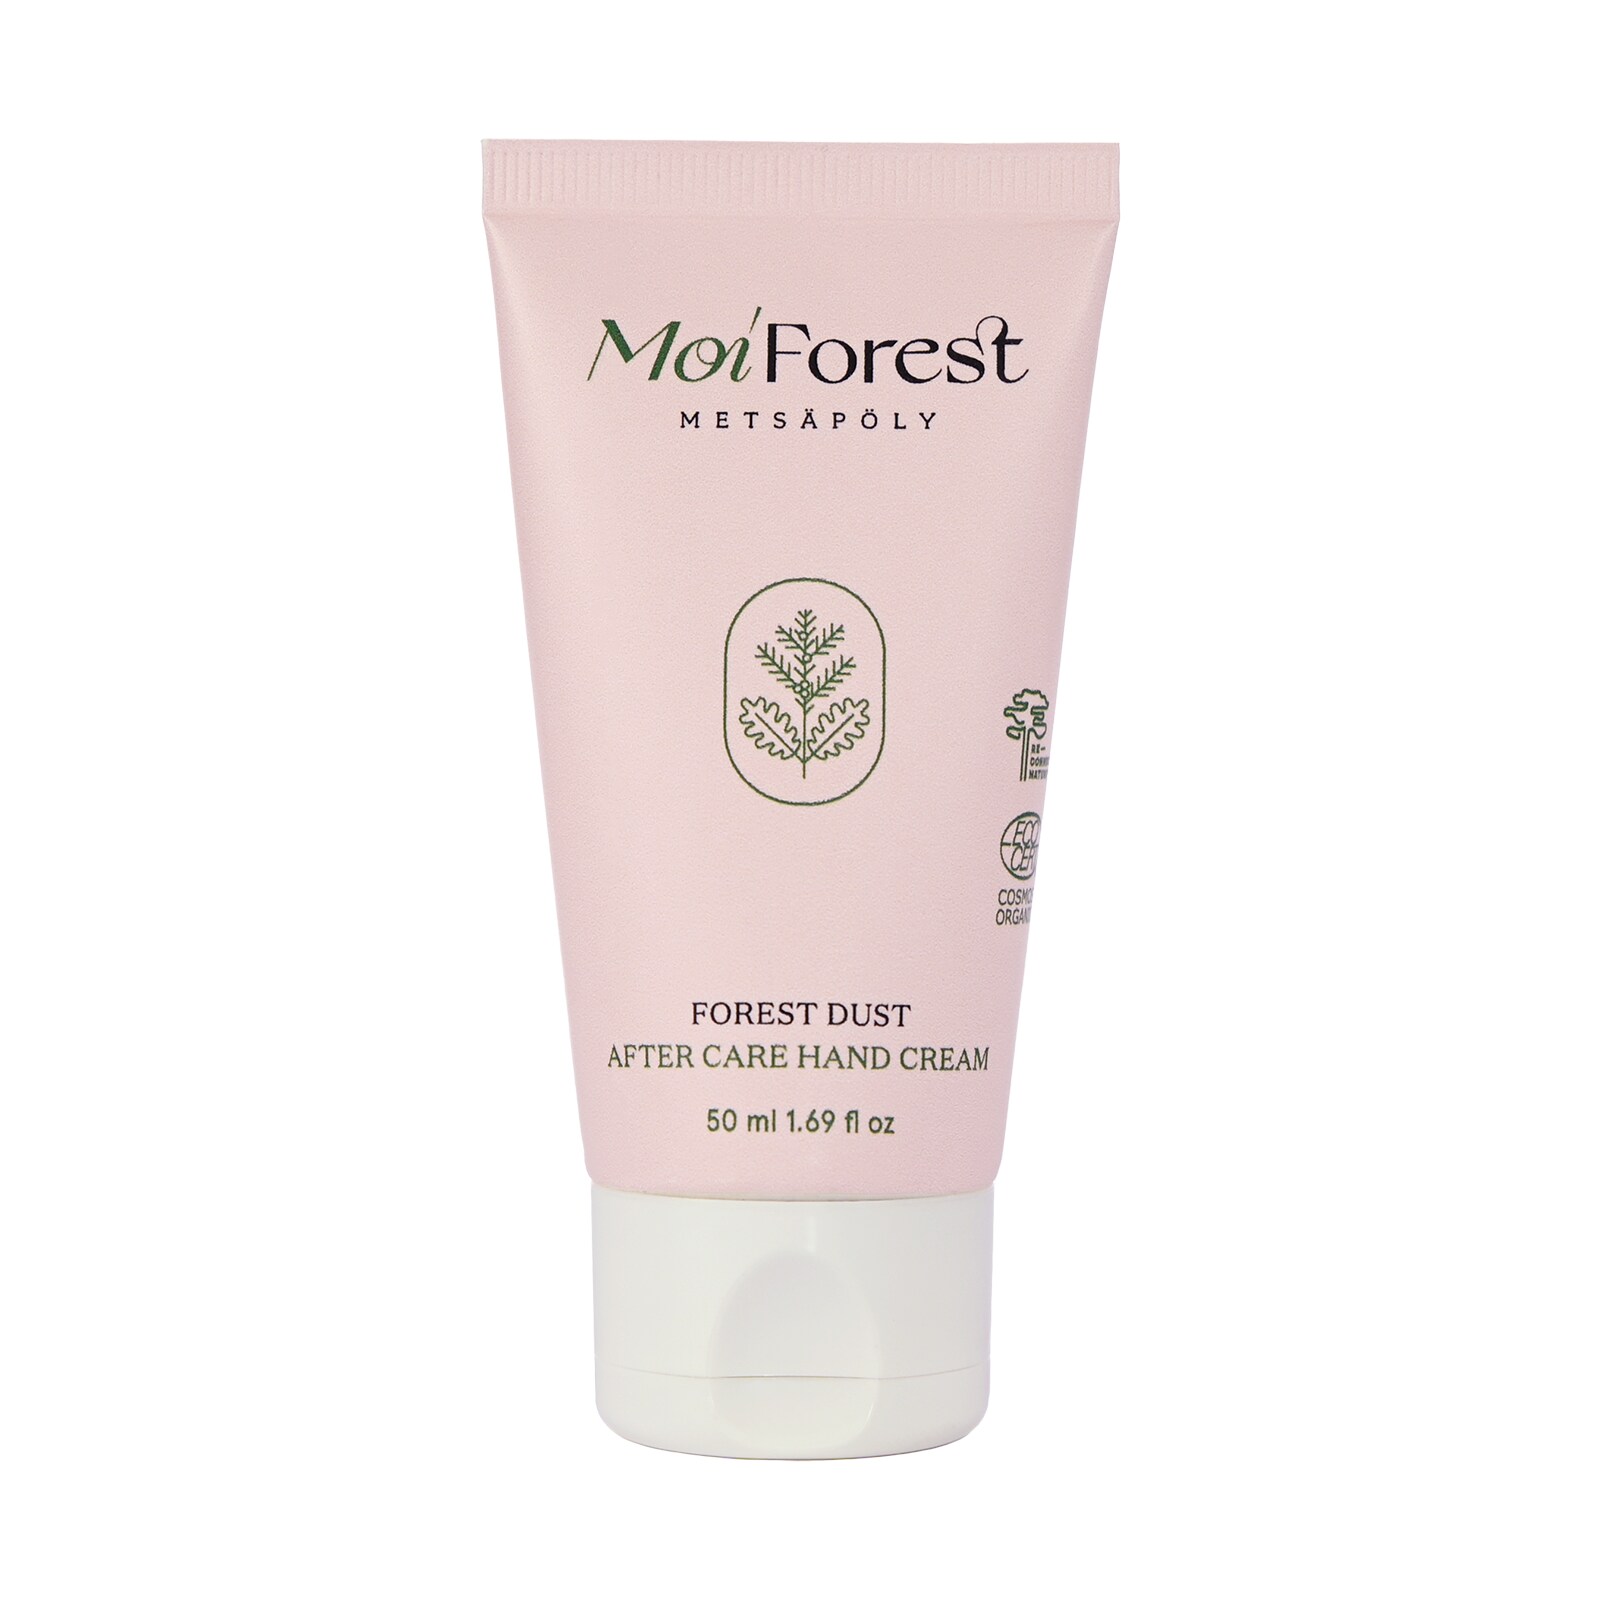 Moi Forest Forest Dust After Care Hand Cream 50ml